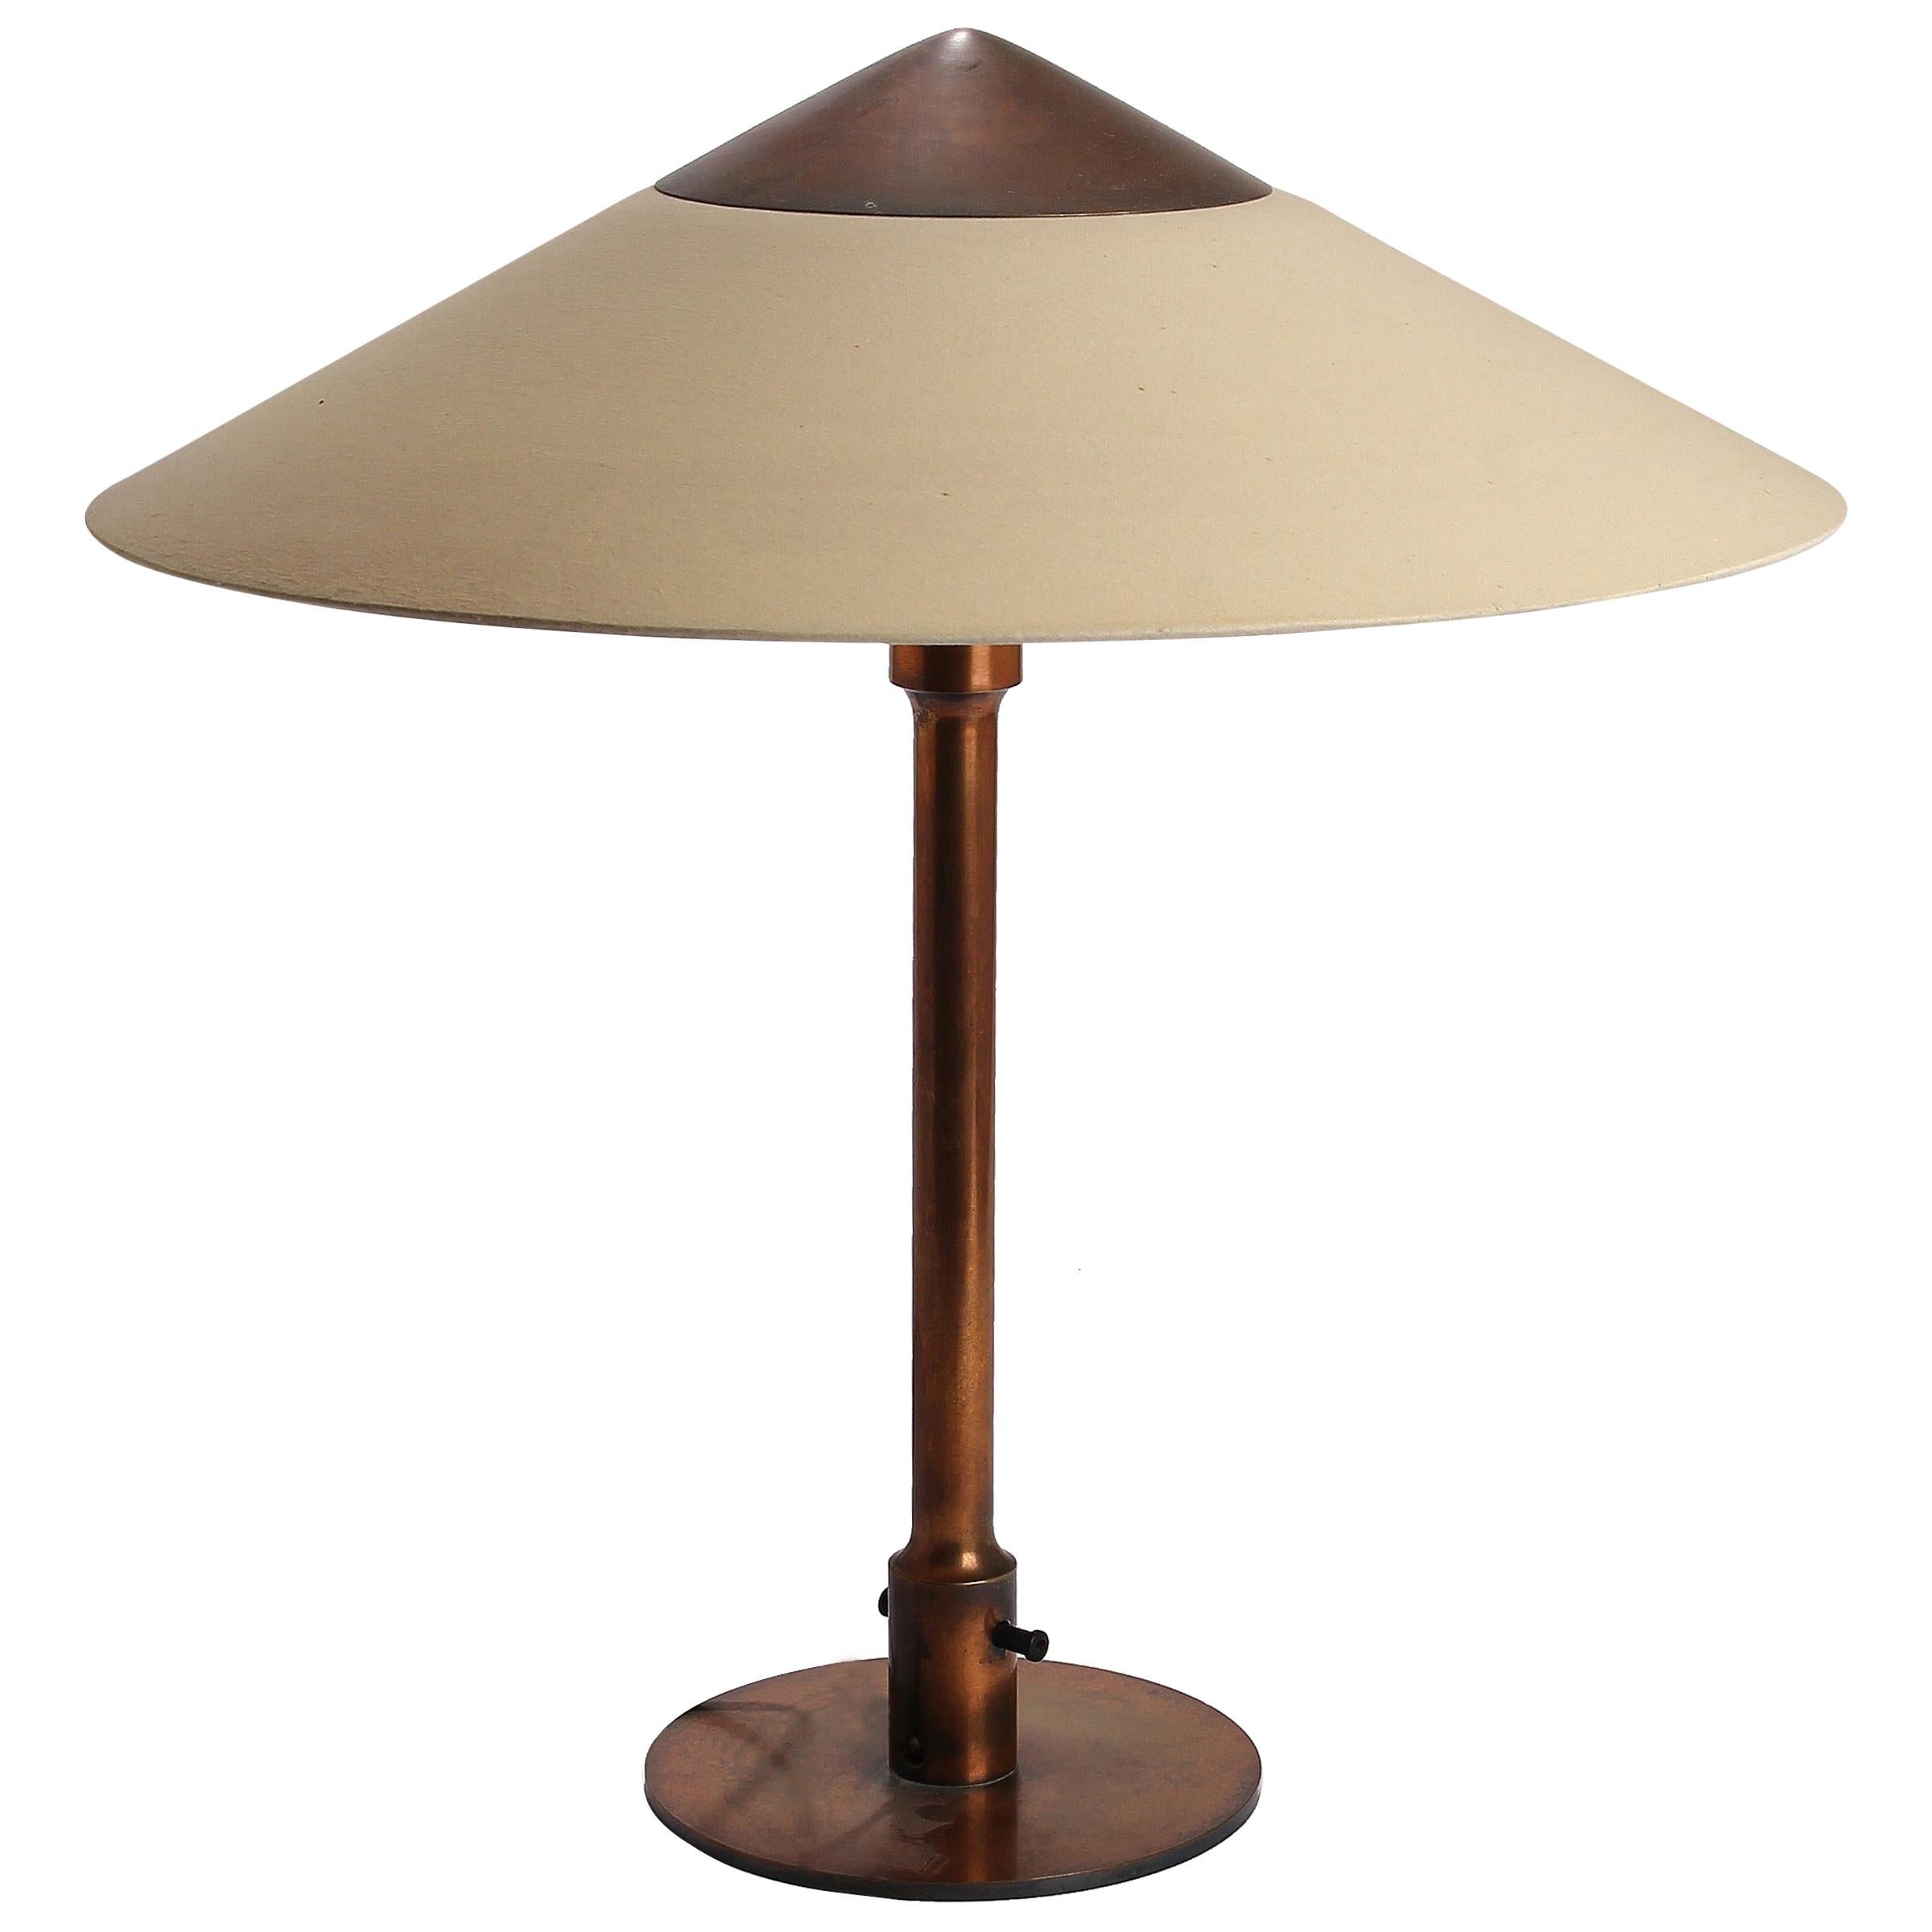 Niels Rasmusen Thykier, "T3 Major", Table Lamp Made of Browned Brass For Sale